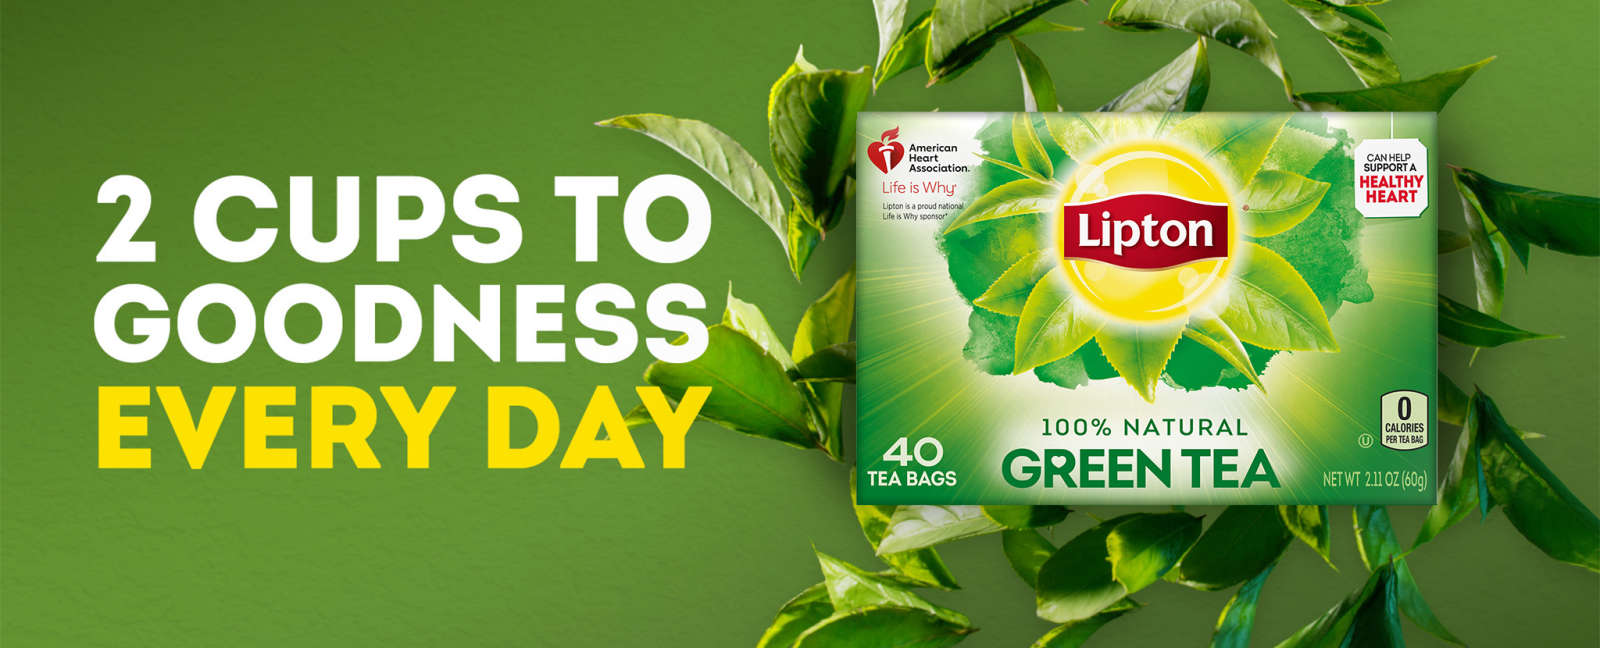 A 40-count box of Lipton Green Tea Bags in front of swirling green tea leaves on a green background. To the left is text that reads, "2 CUPS TO GOODNESS EVERY DAY"